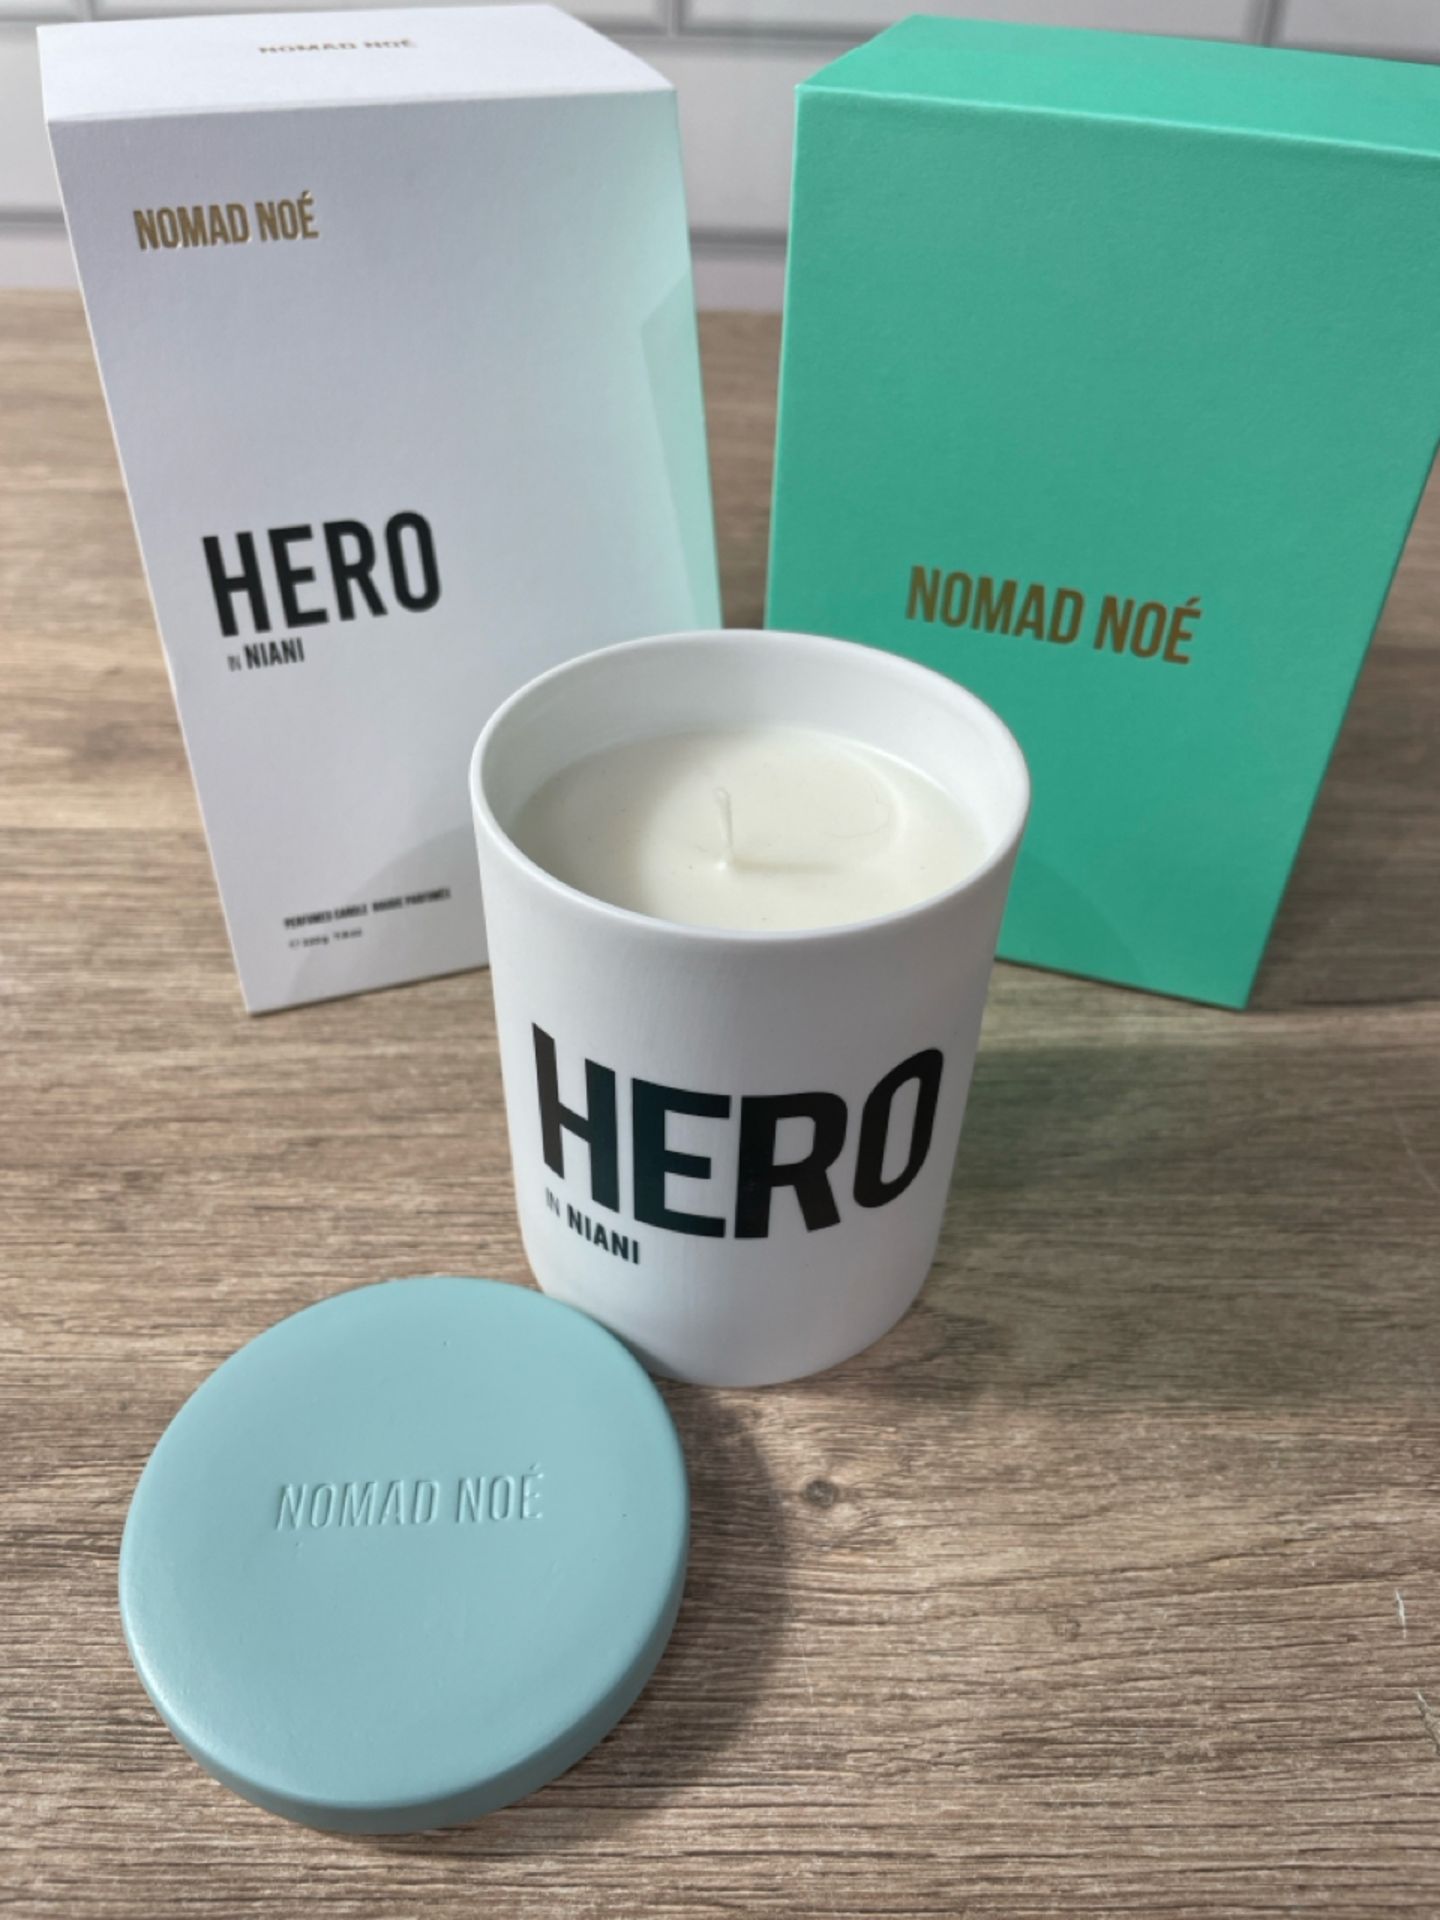 Hero Scented Candle from Nomad Noe - Image 4 of 5